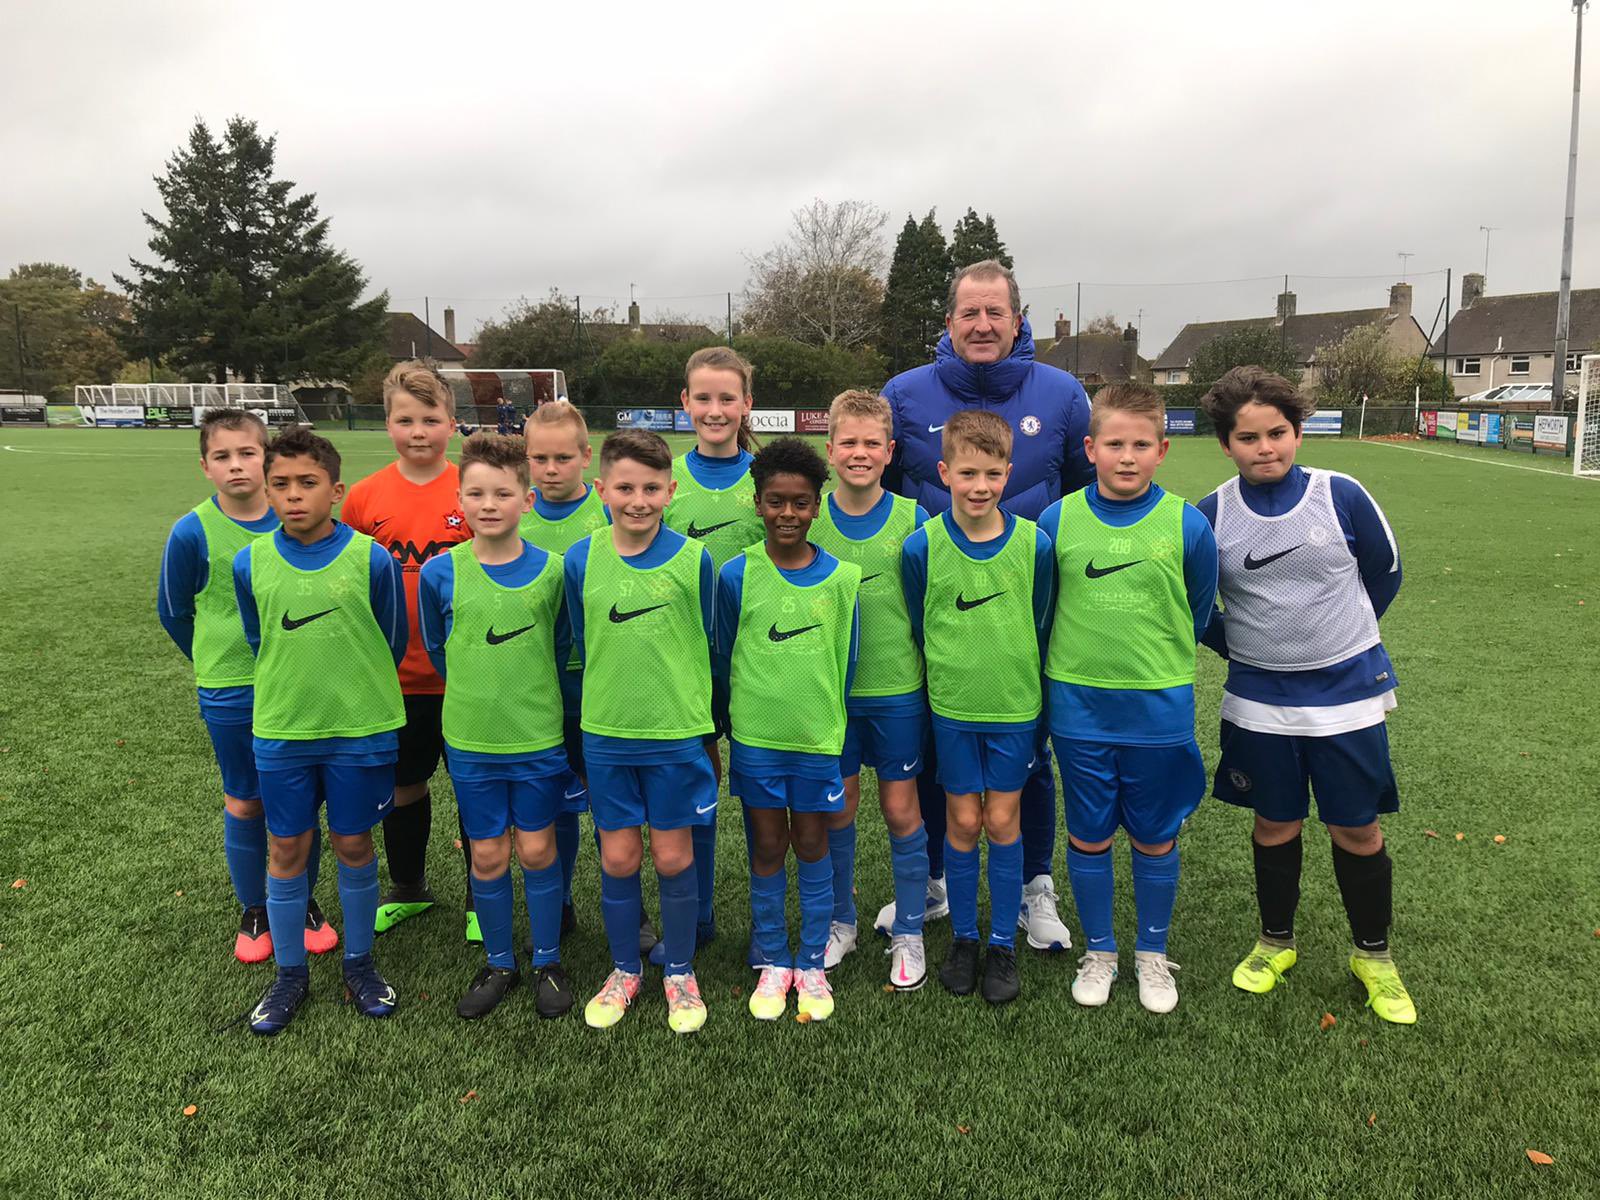 All Star Soccer Two Fantastic Days Of Fixtures Against Chelsea Foundation Thank You So Much For Hosting Us Some Fantastic Football Played Across The Board T Co 5evatui1ef Twitter